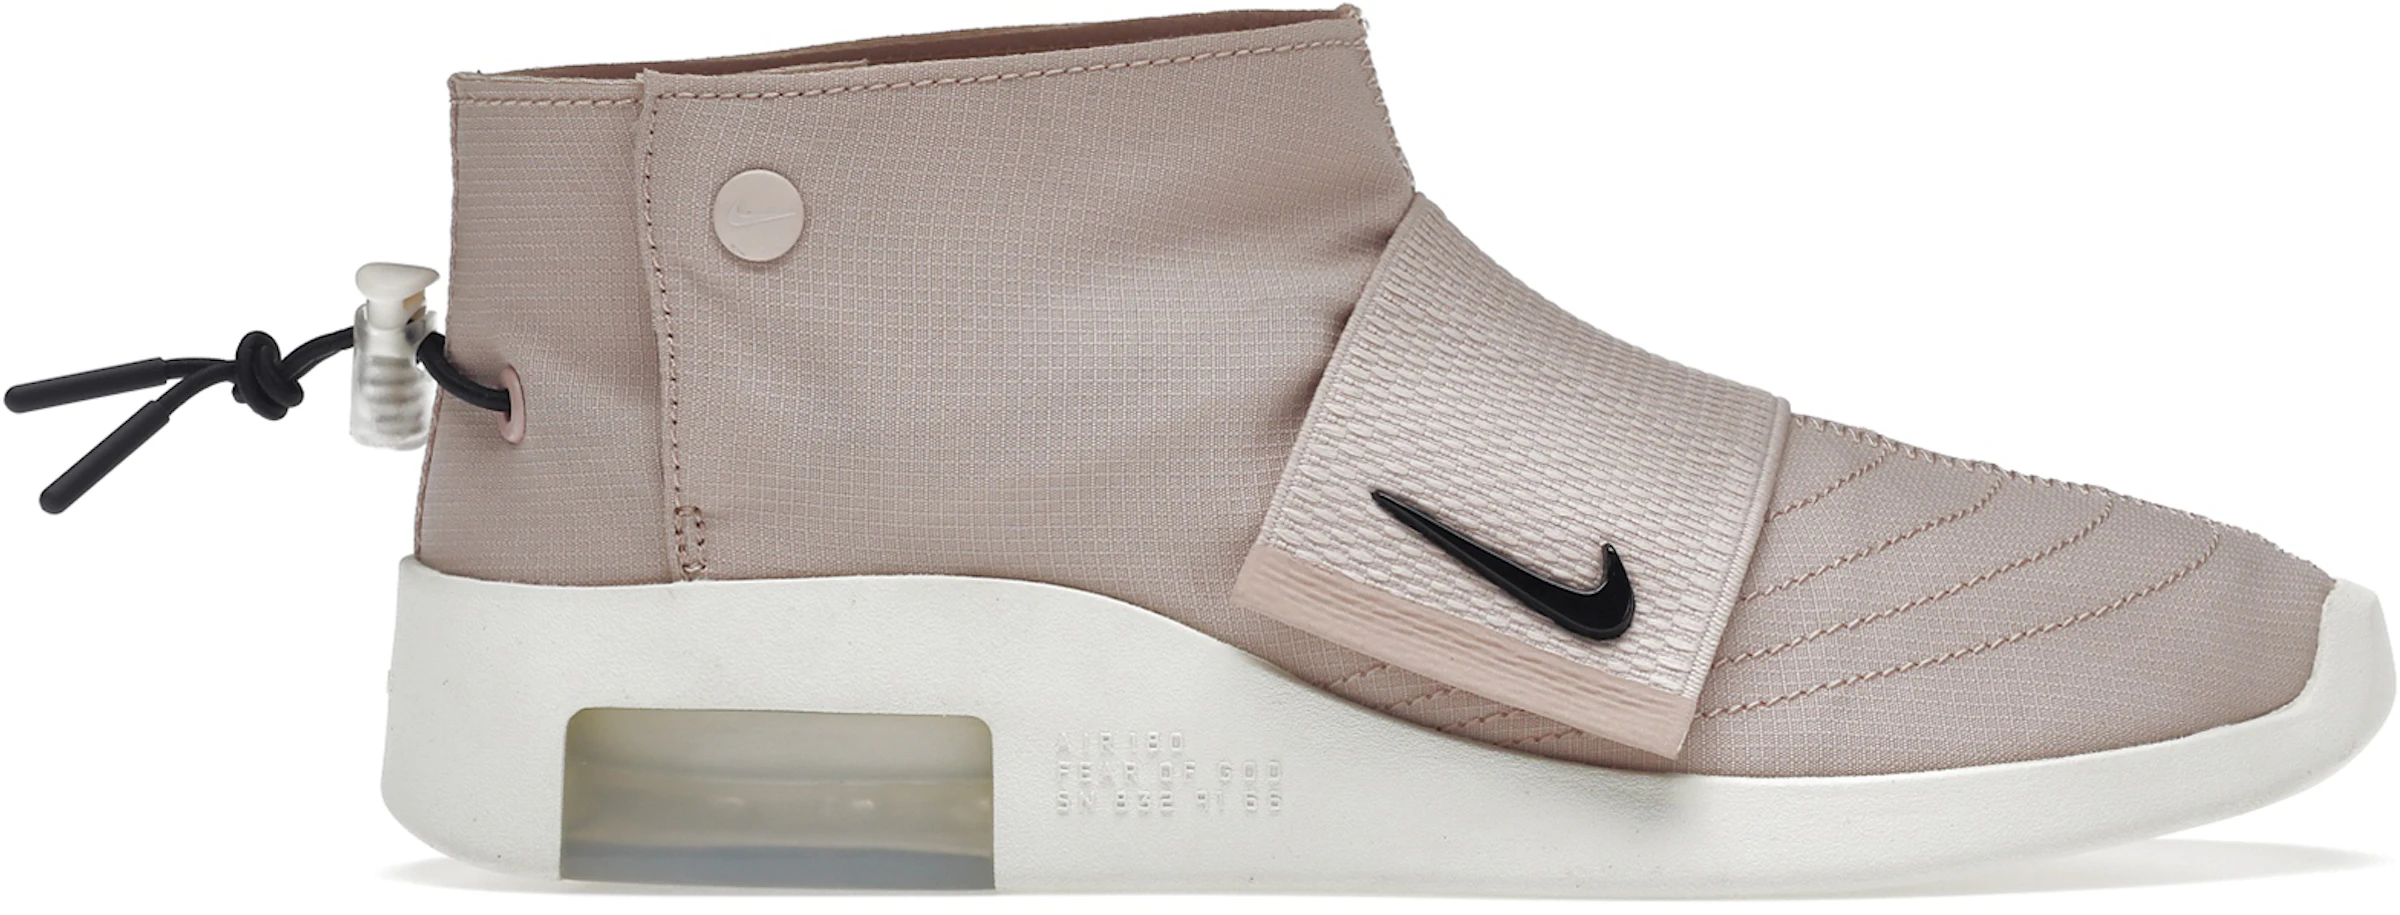 occidental italiano evaluar Nike Air Fear Of God Moccasin Particle Beige - AT8086-200 - ES